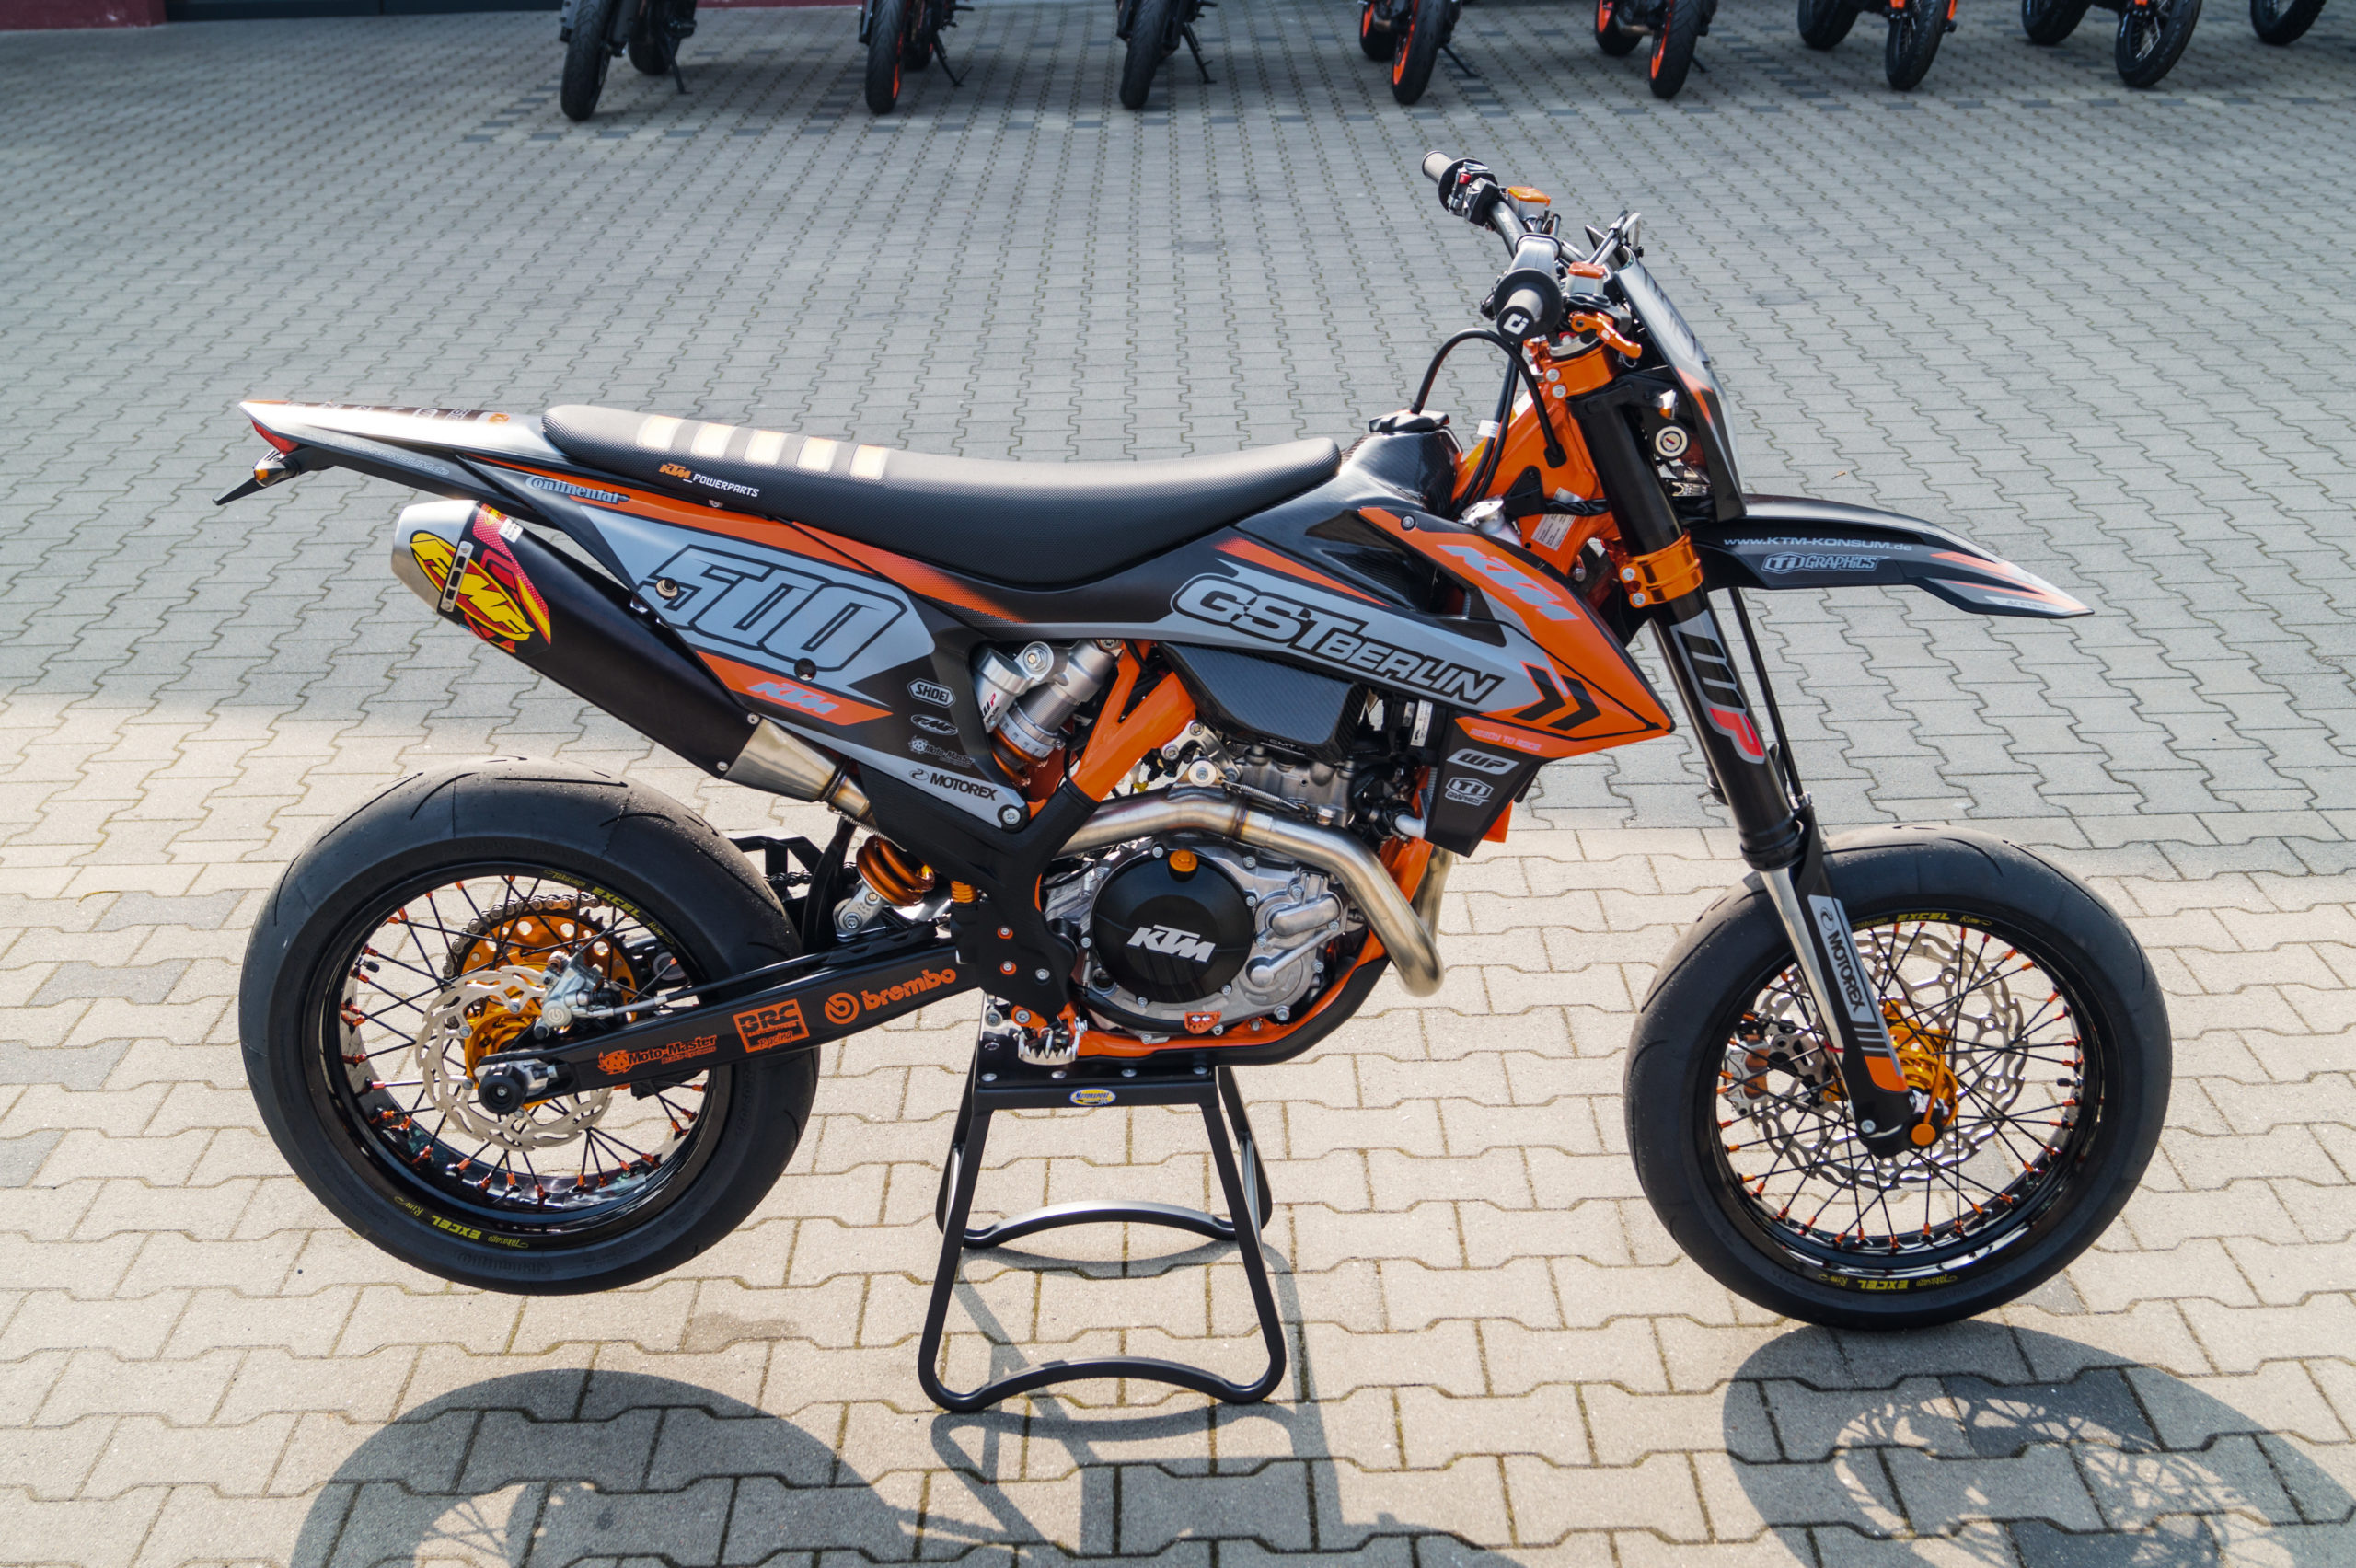 Supermoto: KTM EXC-F 500, Compact high-tech engine, Weekend outrides, Enduro competition, Rally event. 2560x1710 HD Wallpaper.